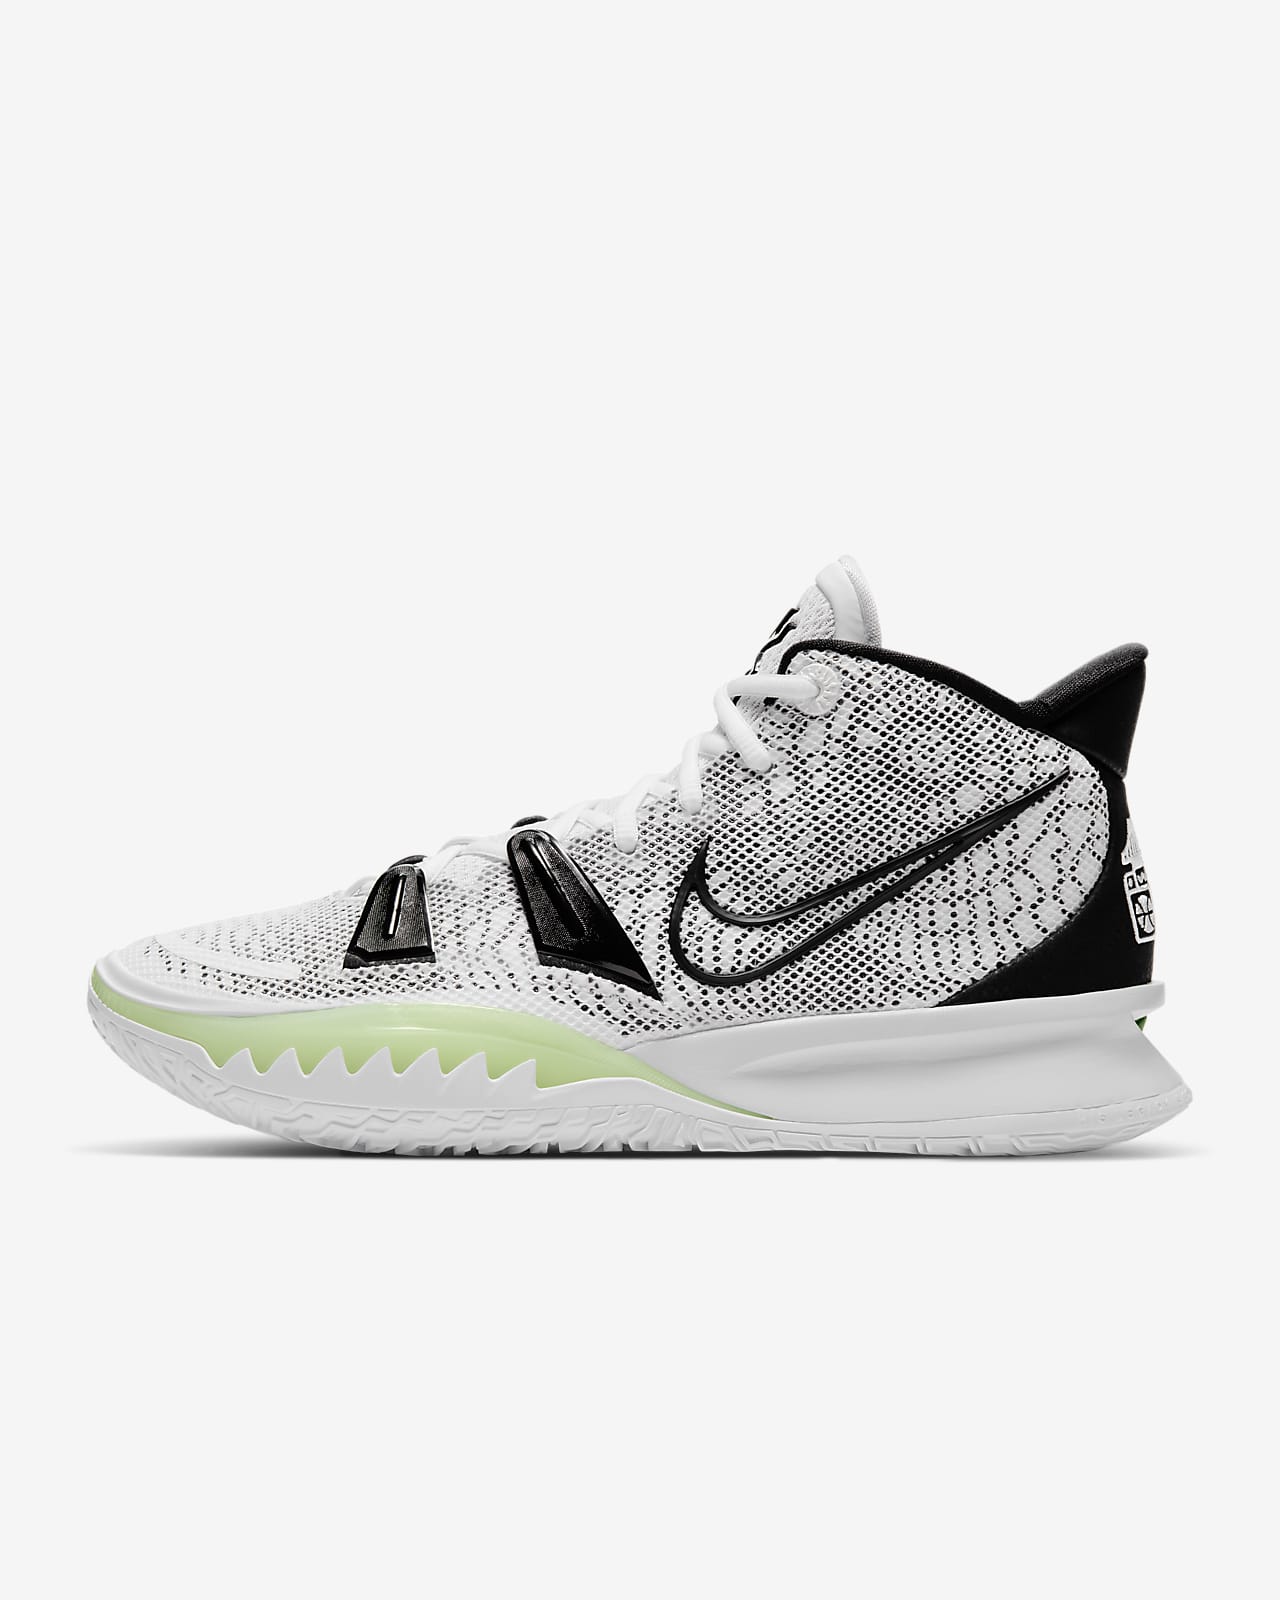 kyrie shoes images